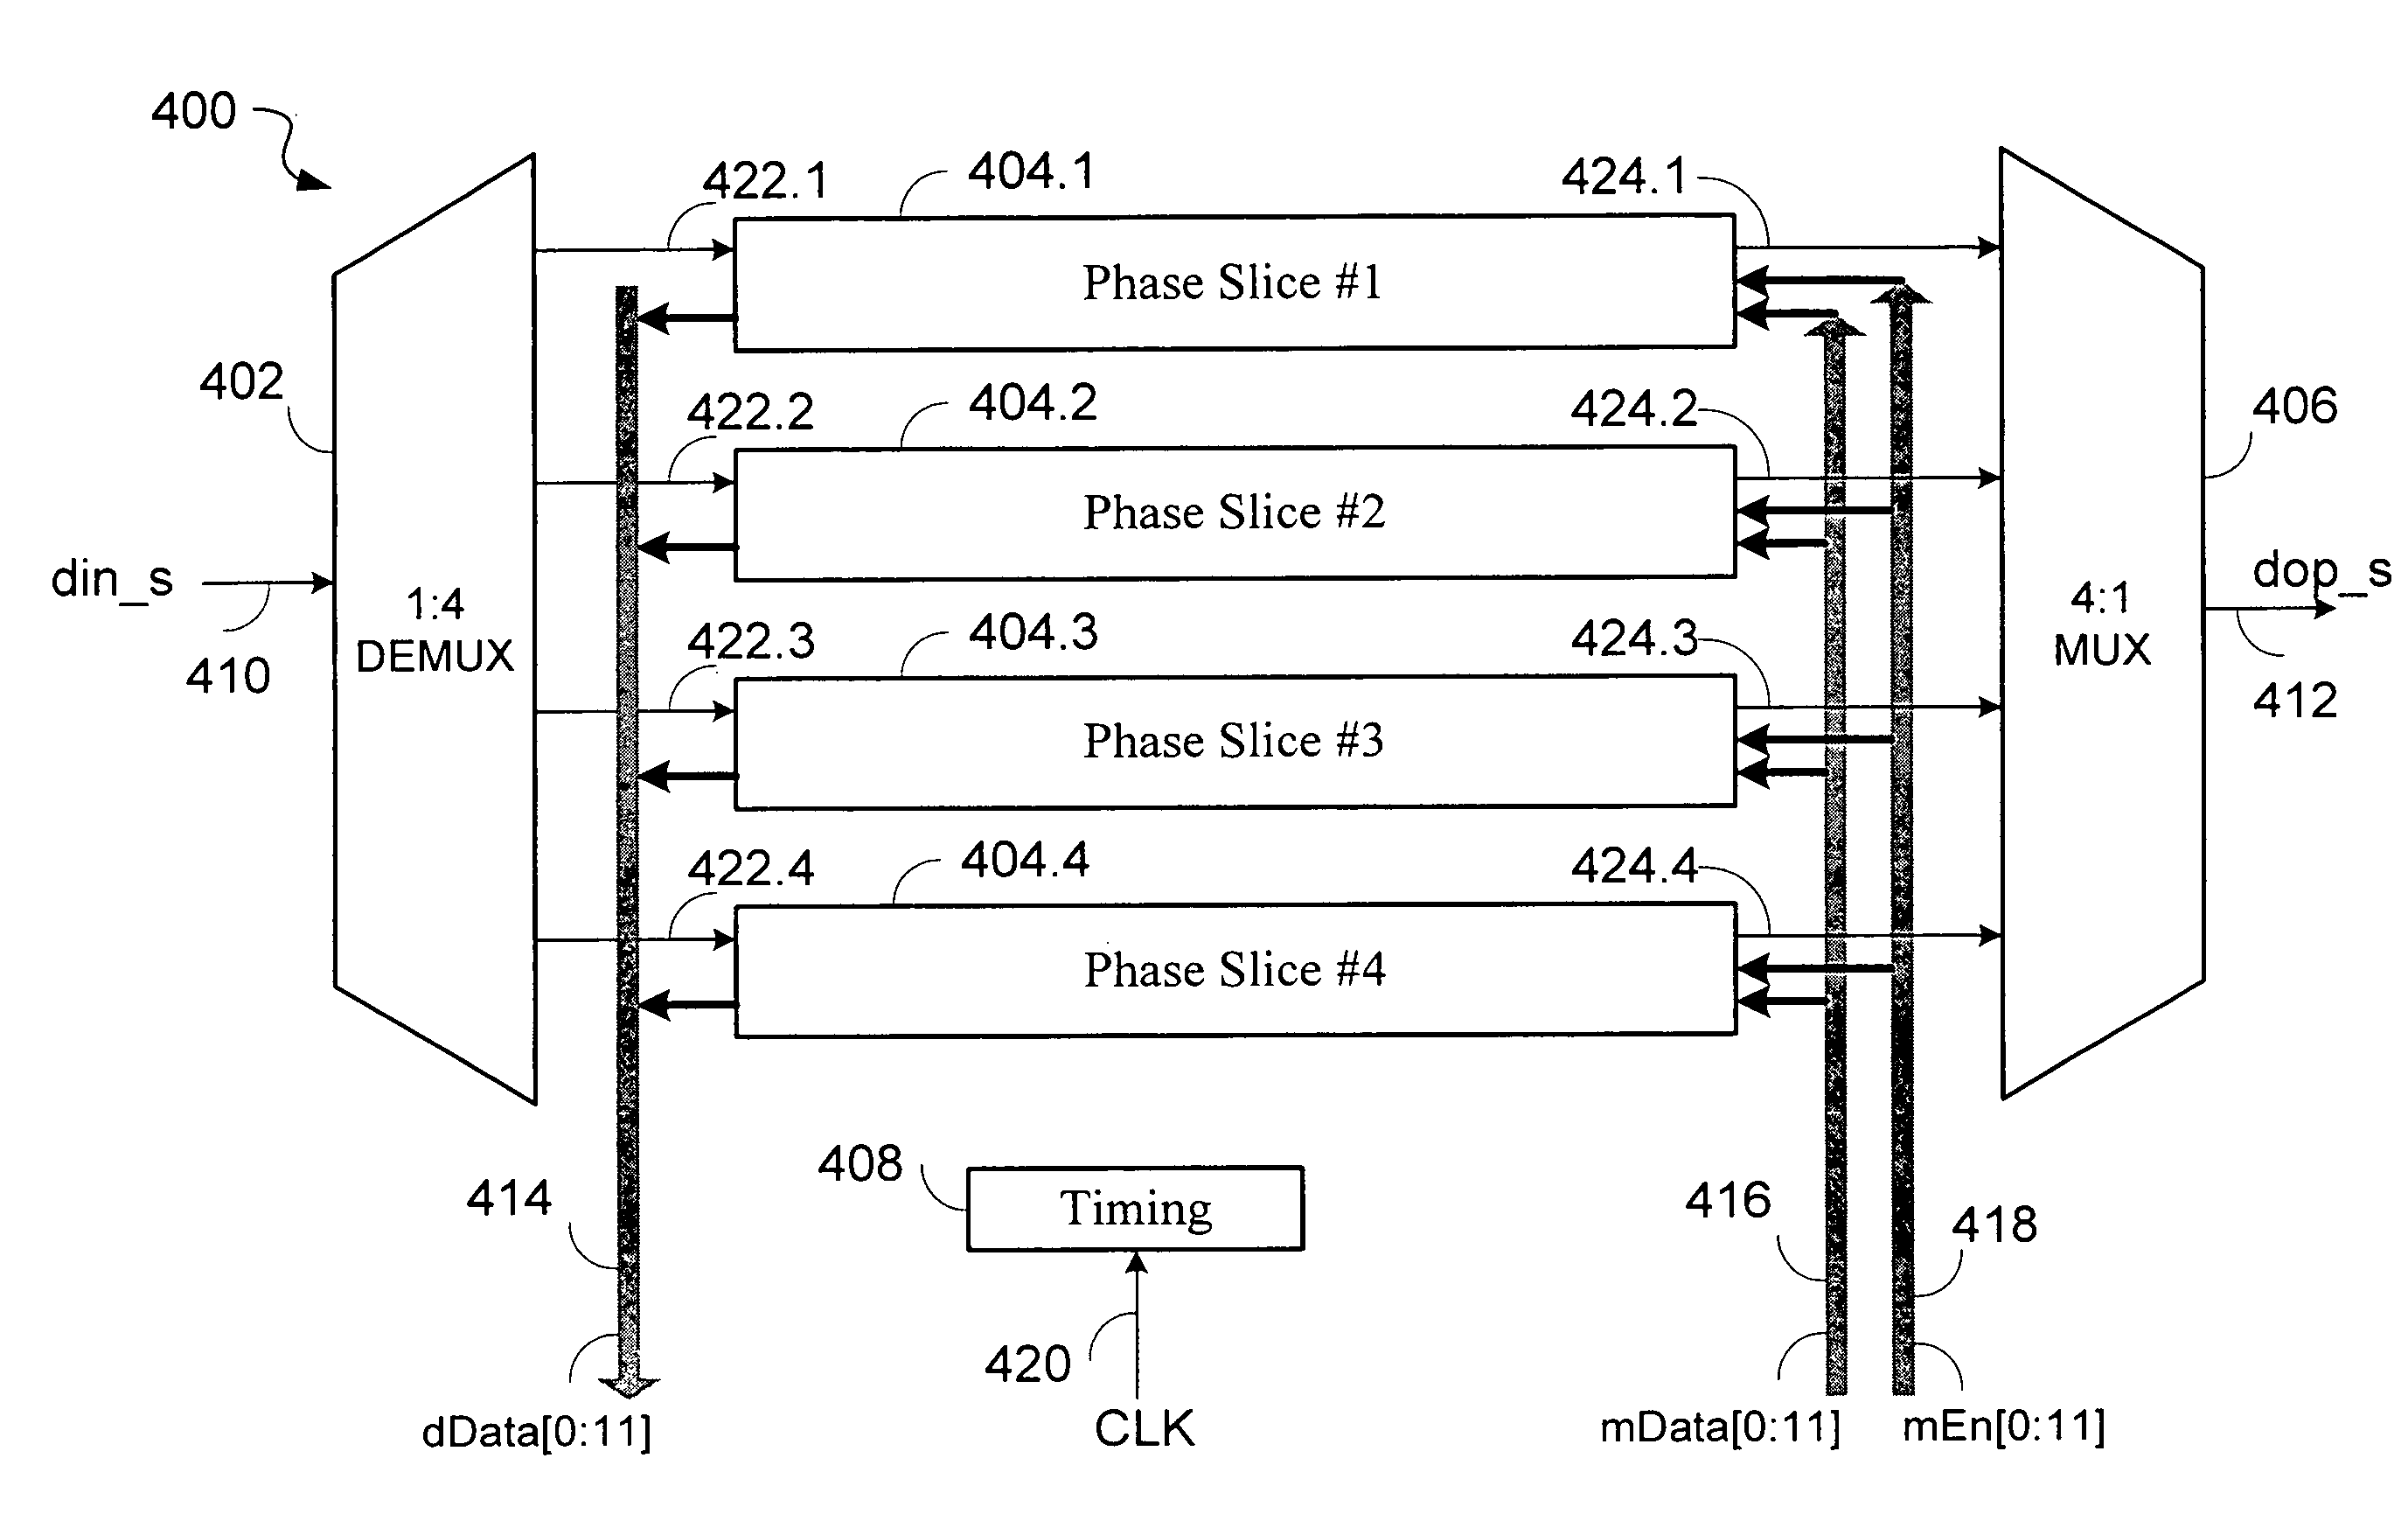 Programmable asynchronous first-in-first-out (FIFO) structure with merging capability